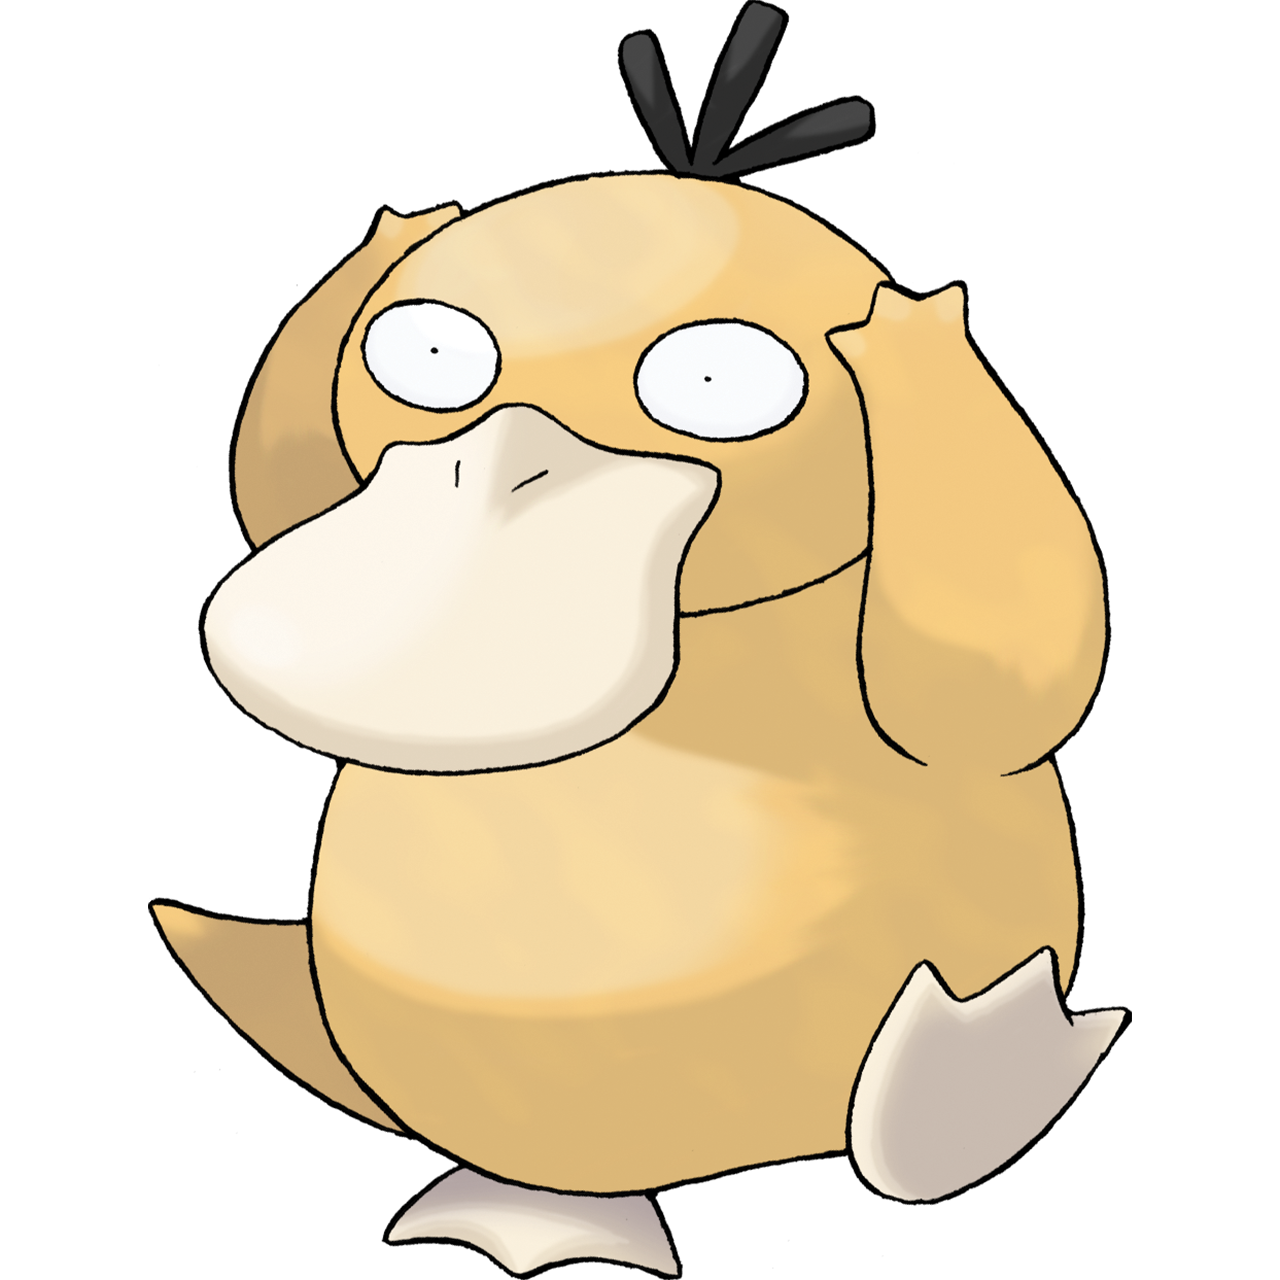 Psyduck Pokemon PNG HD Images